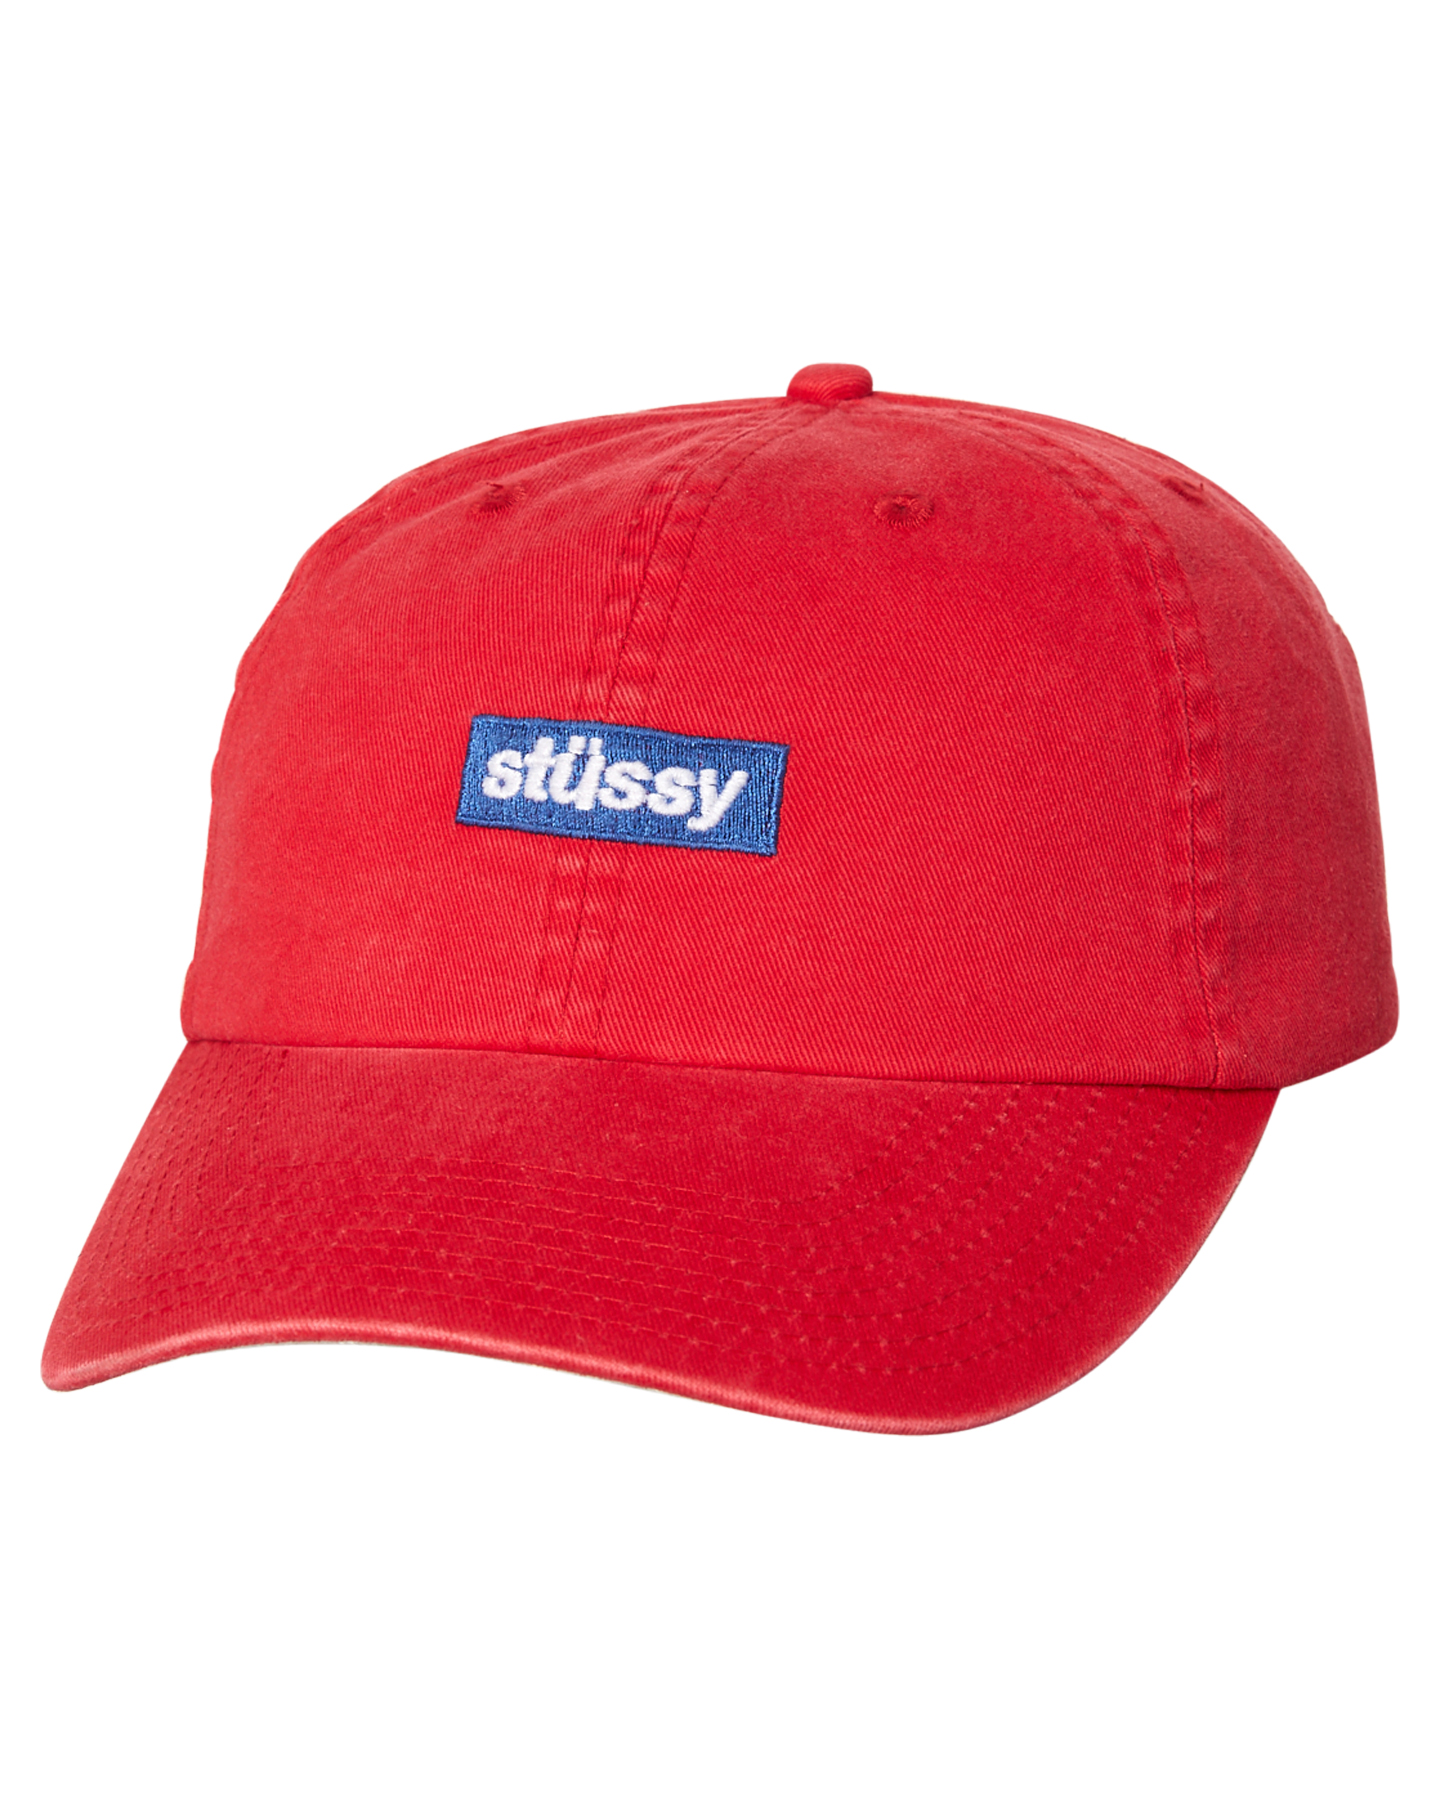 BRIGHT-RED-MENS-ACCESSORIES-STUSSY-HEADWEAR-ST773005BRED